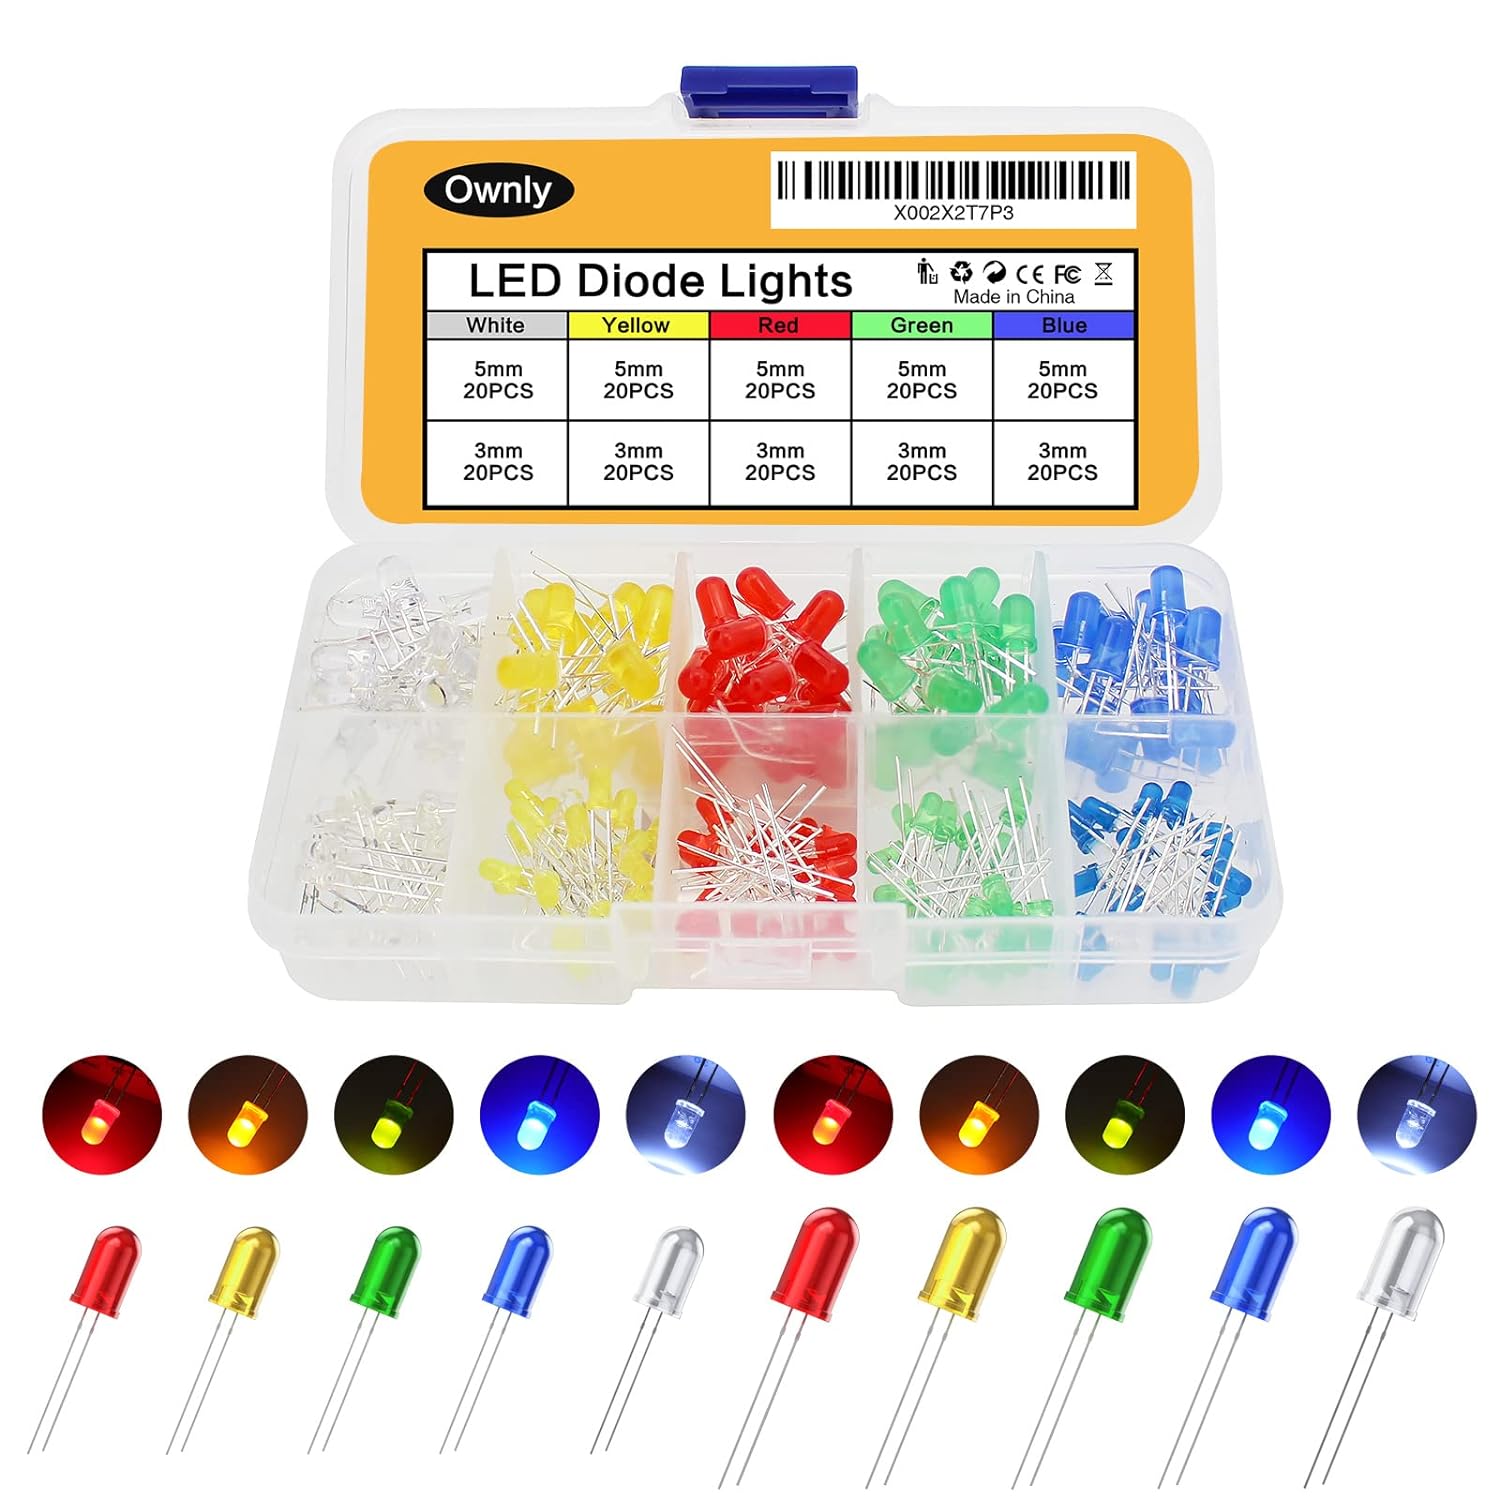 200Pcs 3mm  5mm Led Light Emitting Diodes Assortment Kit, Mini/Tiny/Small Individual Led Single Light, Clear/White Red Green Blue Yellow Assorted Led Diode Bulbs Set for Arduino, Breadboard, etc